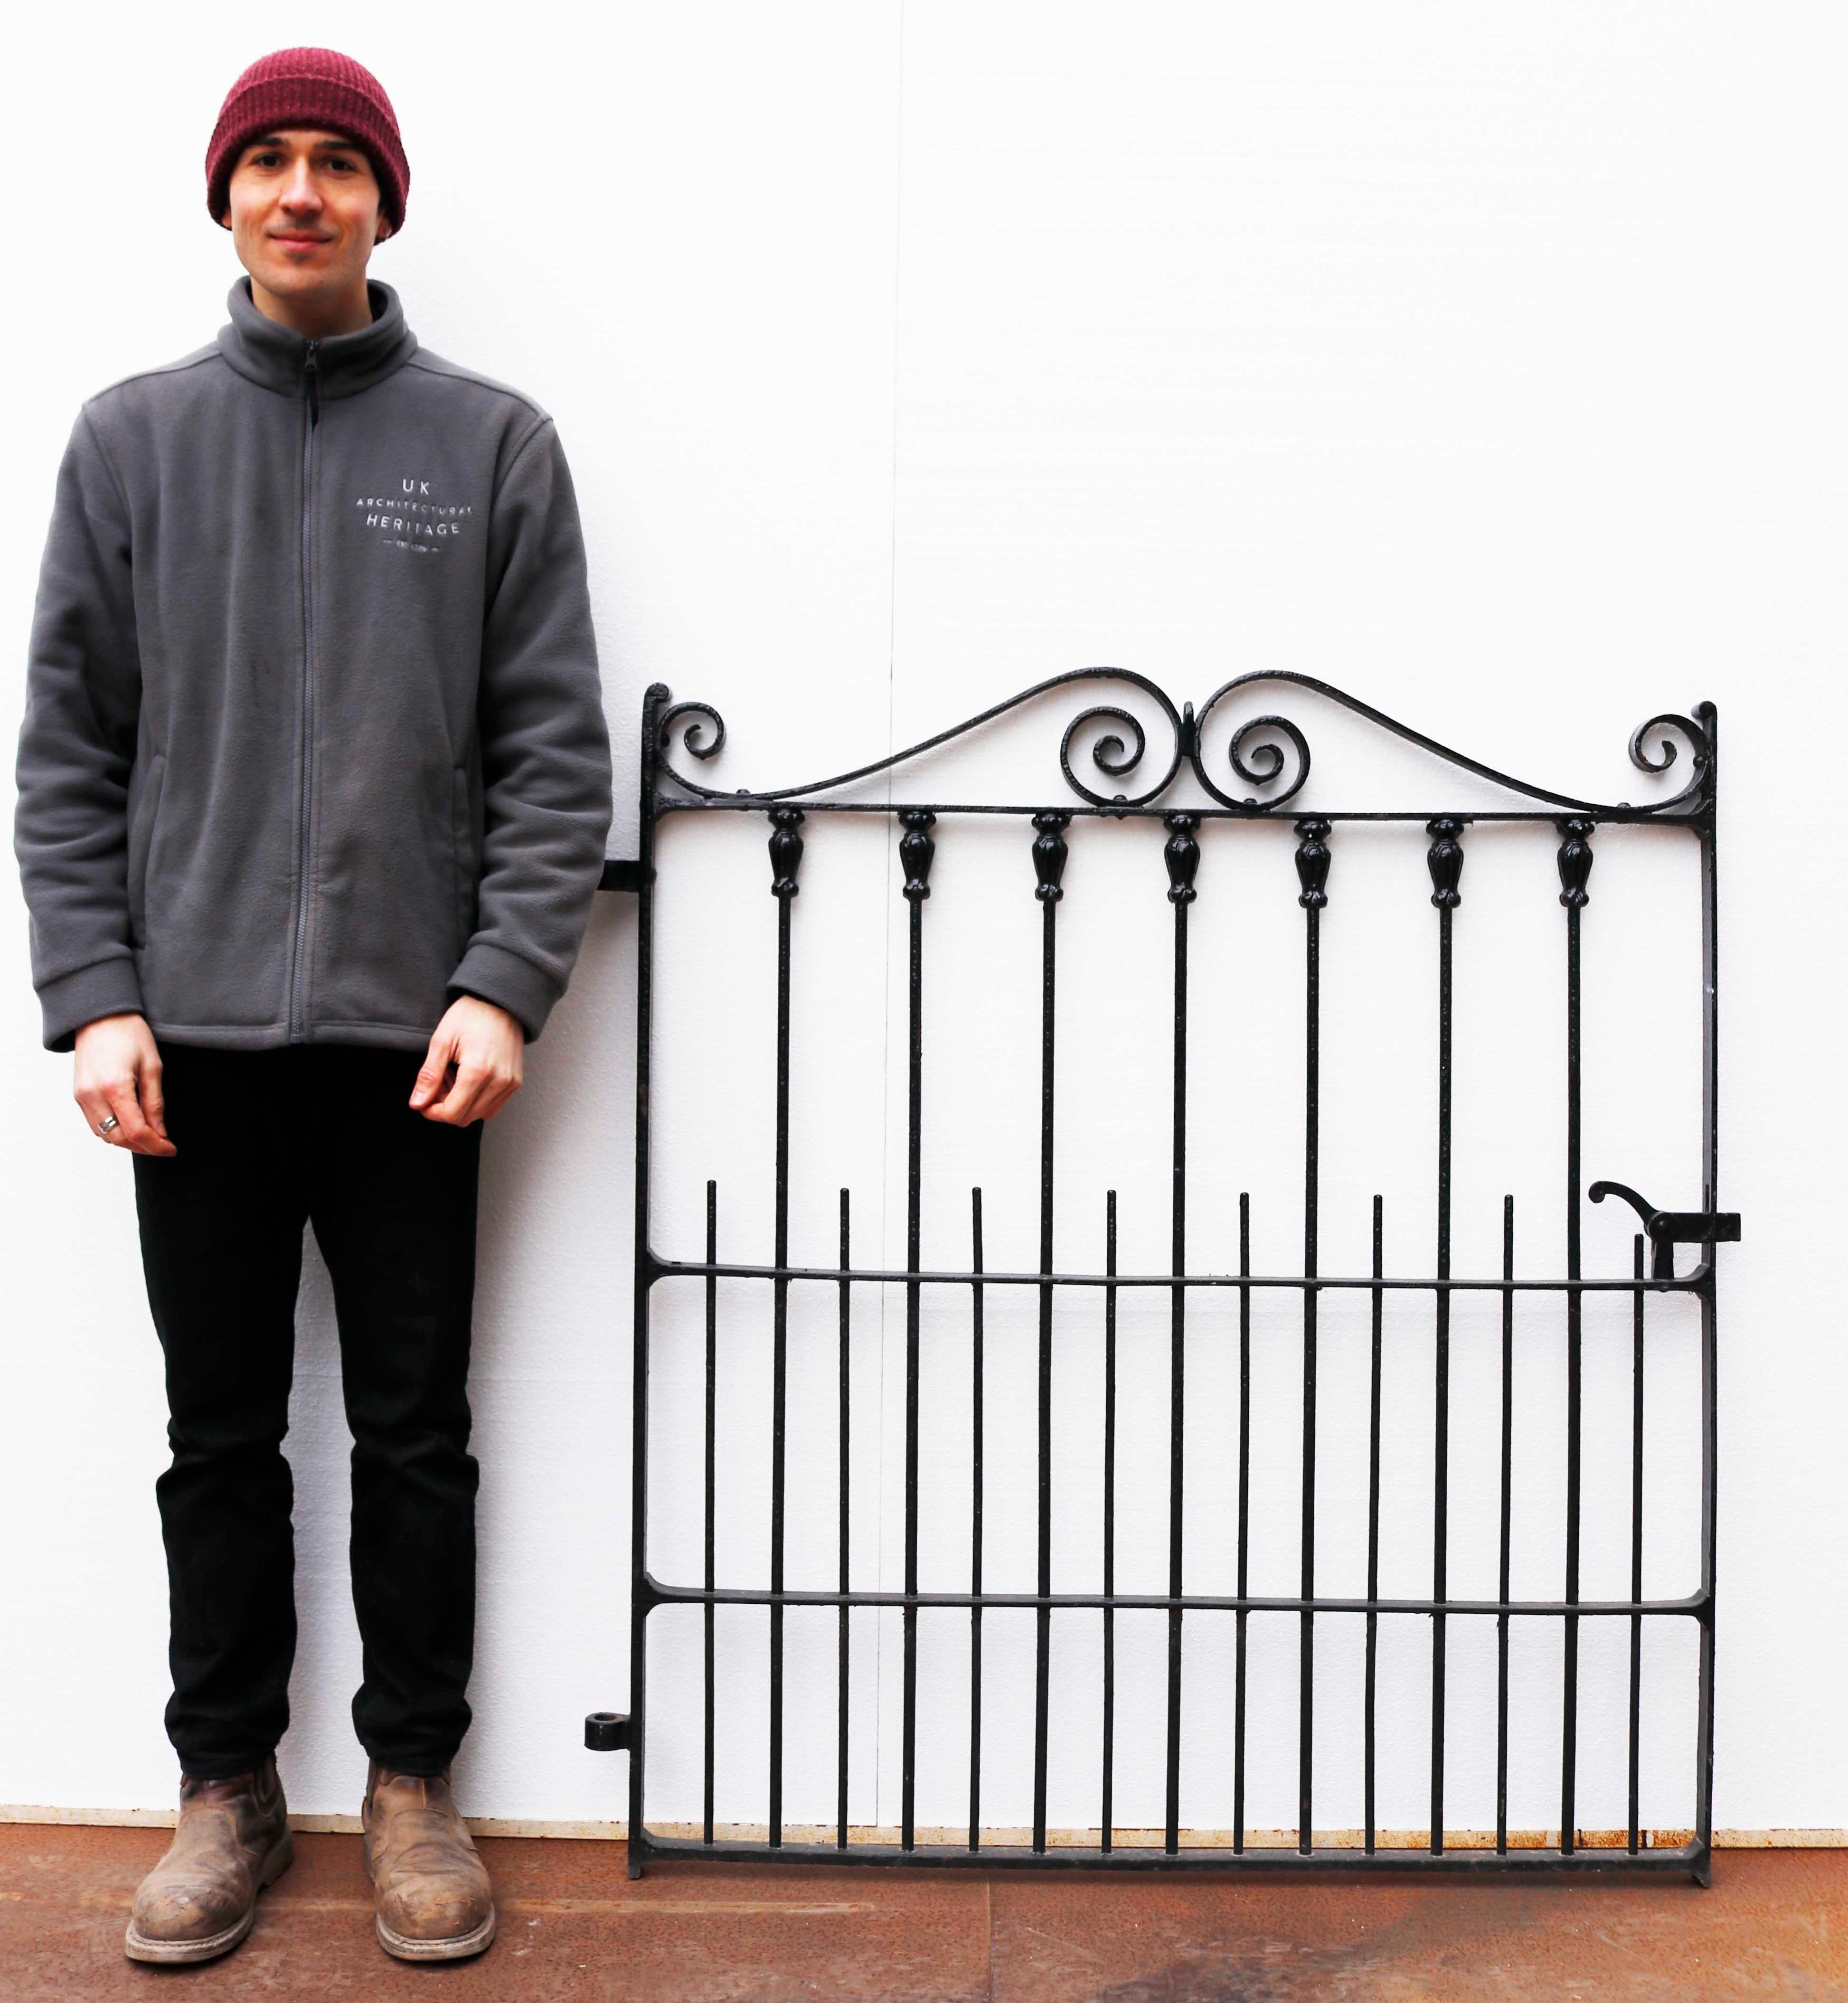 Victorian Wrought Iron Pedestrian Gate. A recently painted garden gate with a decorative scroll design.

What is wrought iron?
Wrought iron is a type of refined, low carbon iron that is smelted and worked on with tools. The term wrought iron